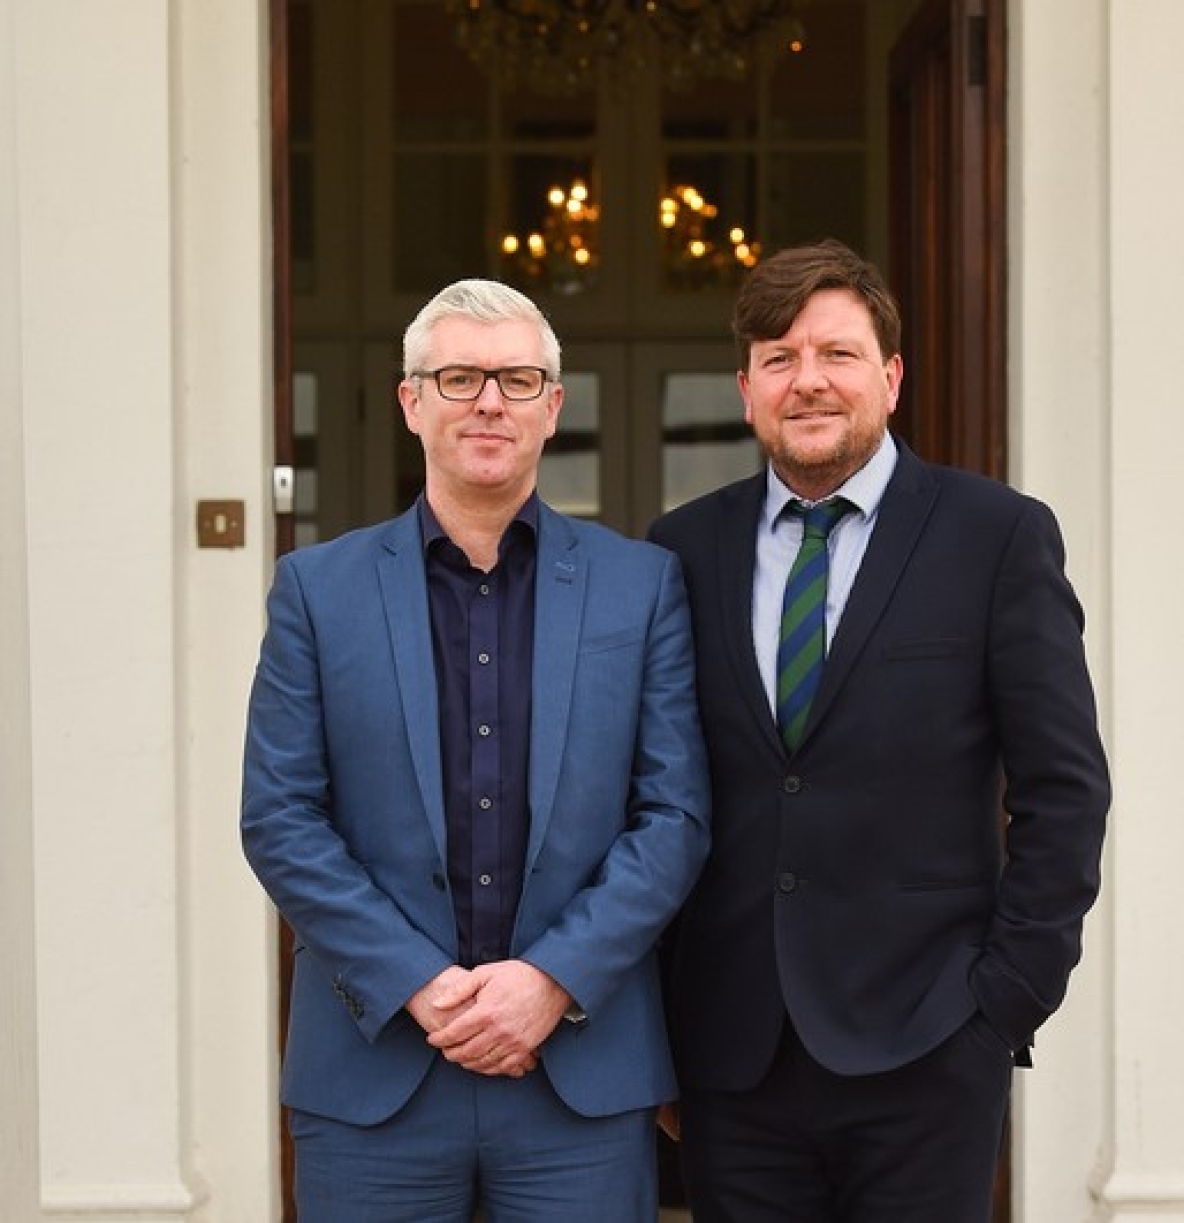 Dr Fergal Lynch, Secretary General of the Department of Children and Youth Affairs and Professor Sean Redmond